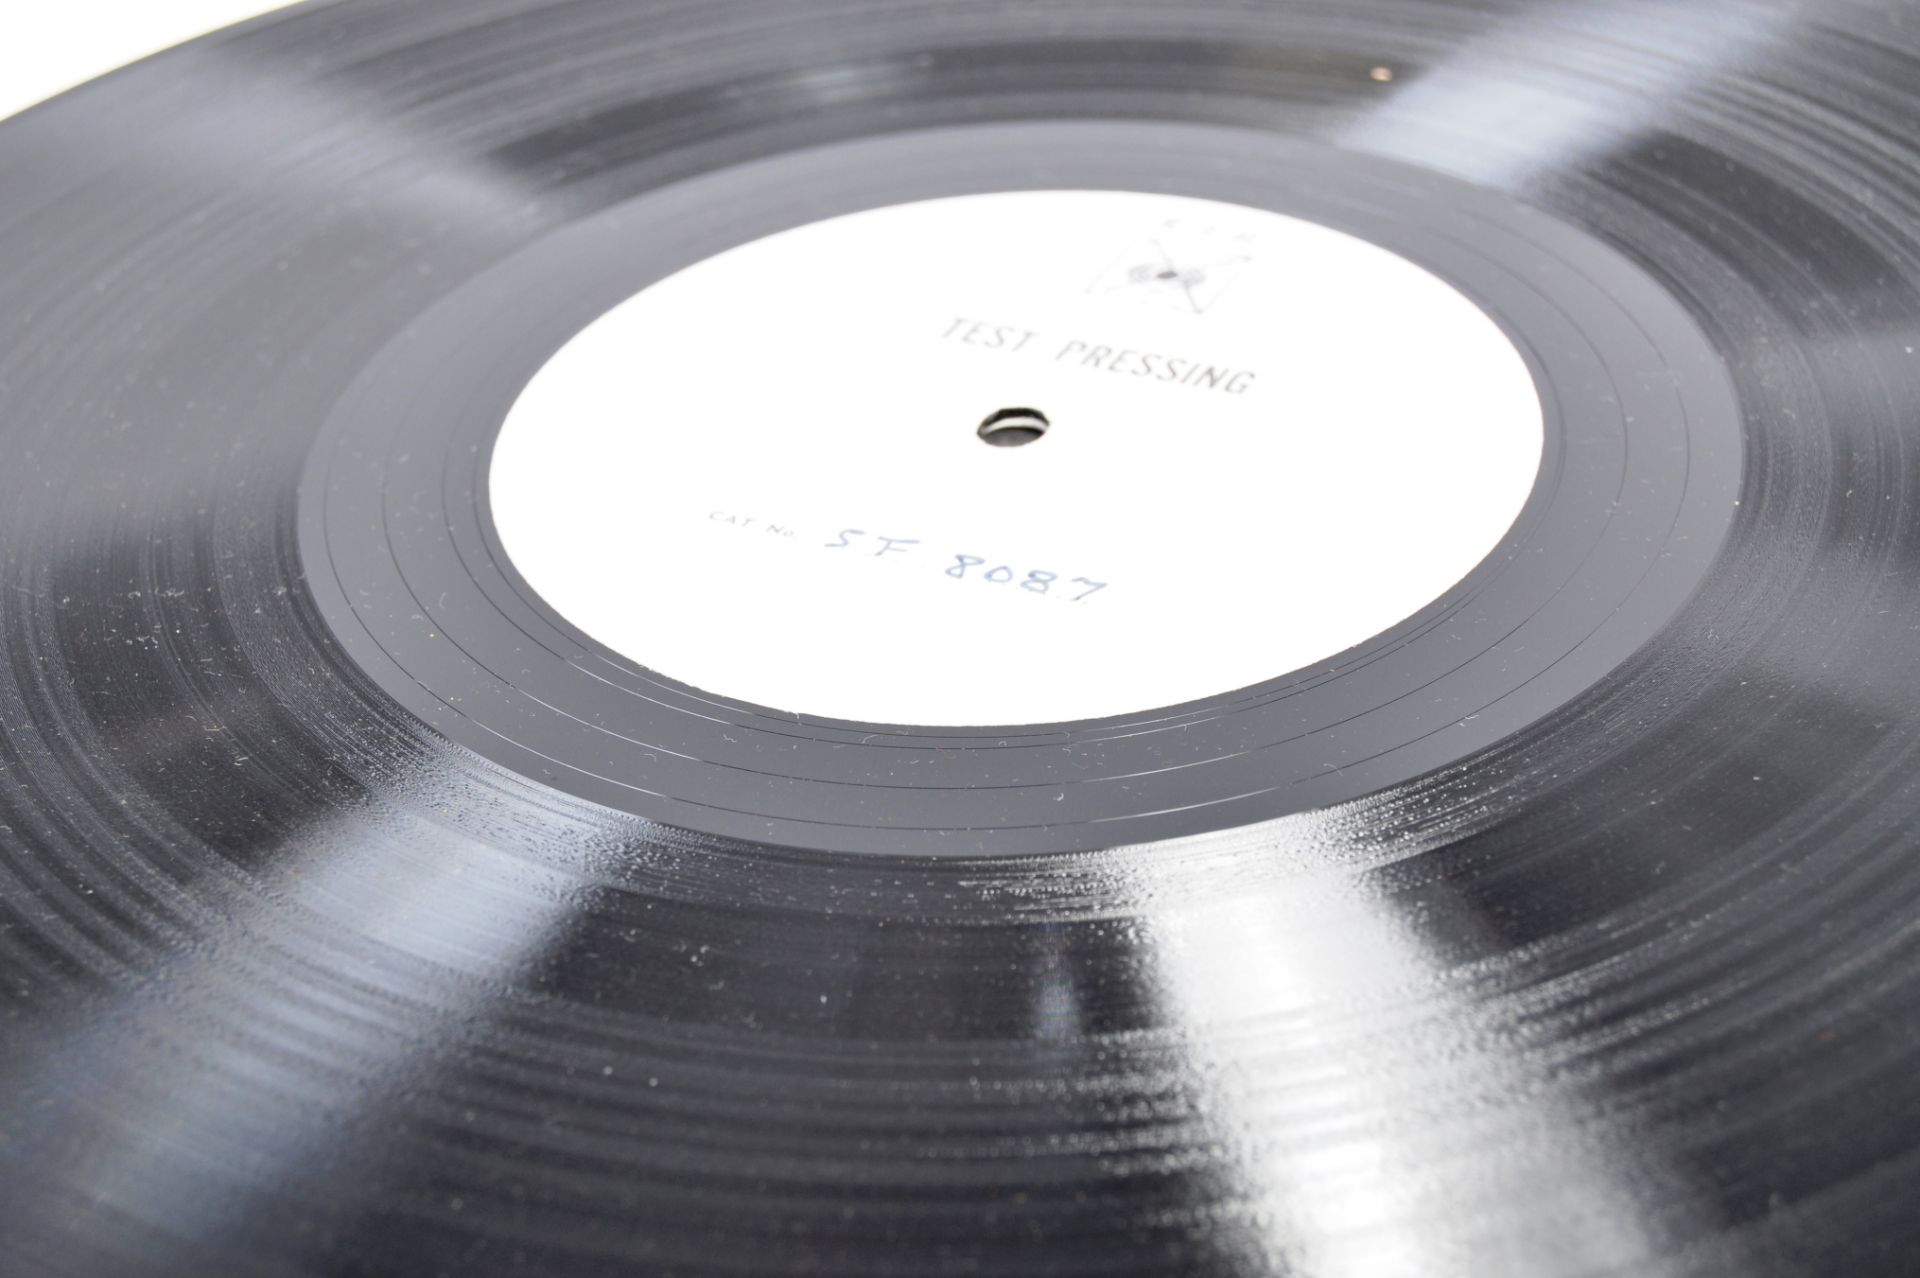 WHEN SEX LEERS IT'S INQUISITIVE HEAD - WYNGARDE'S PERSONAL TEST PRESS LP - Image 3 of 5